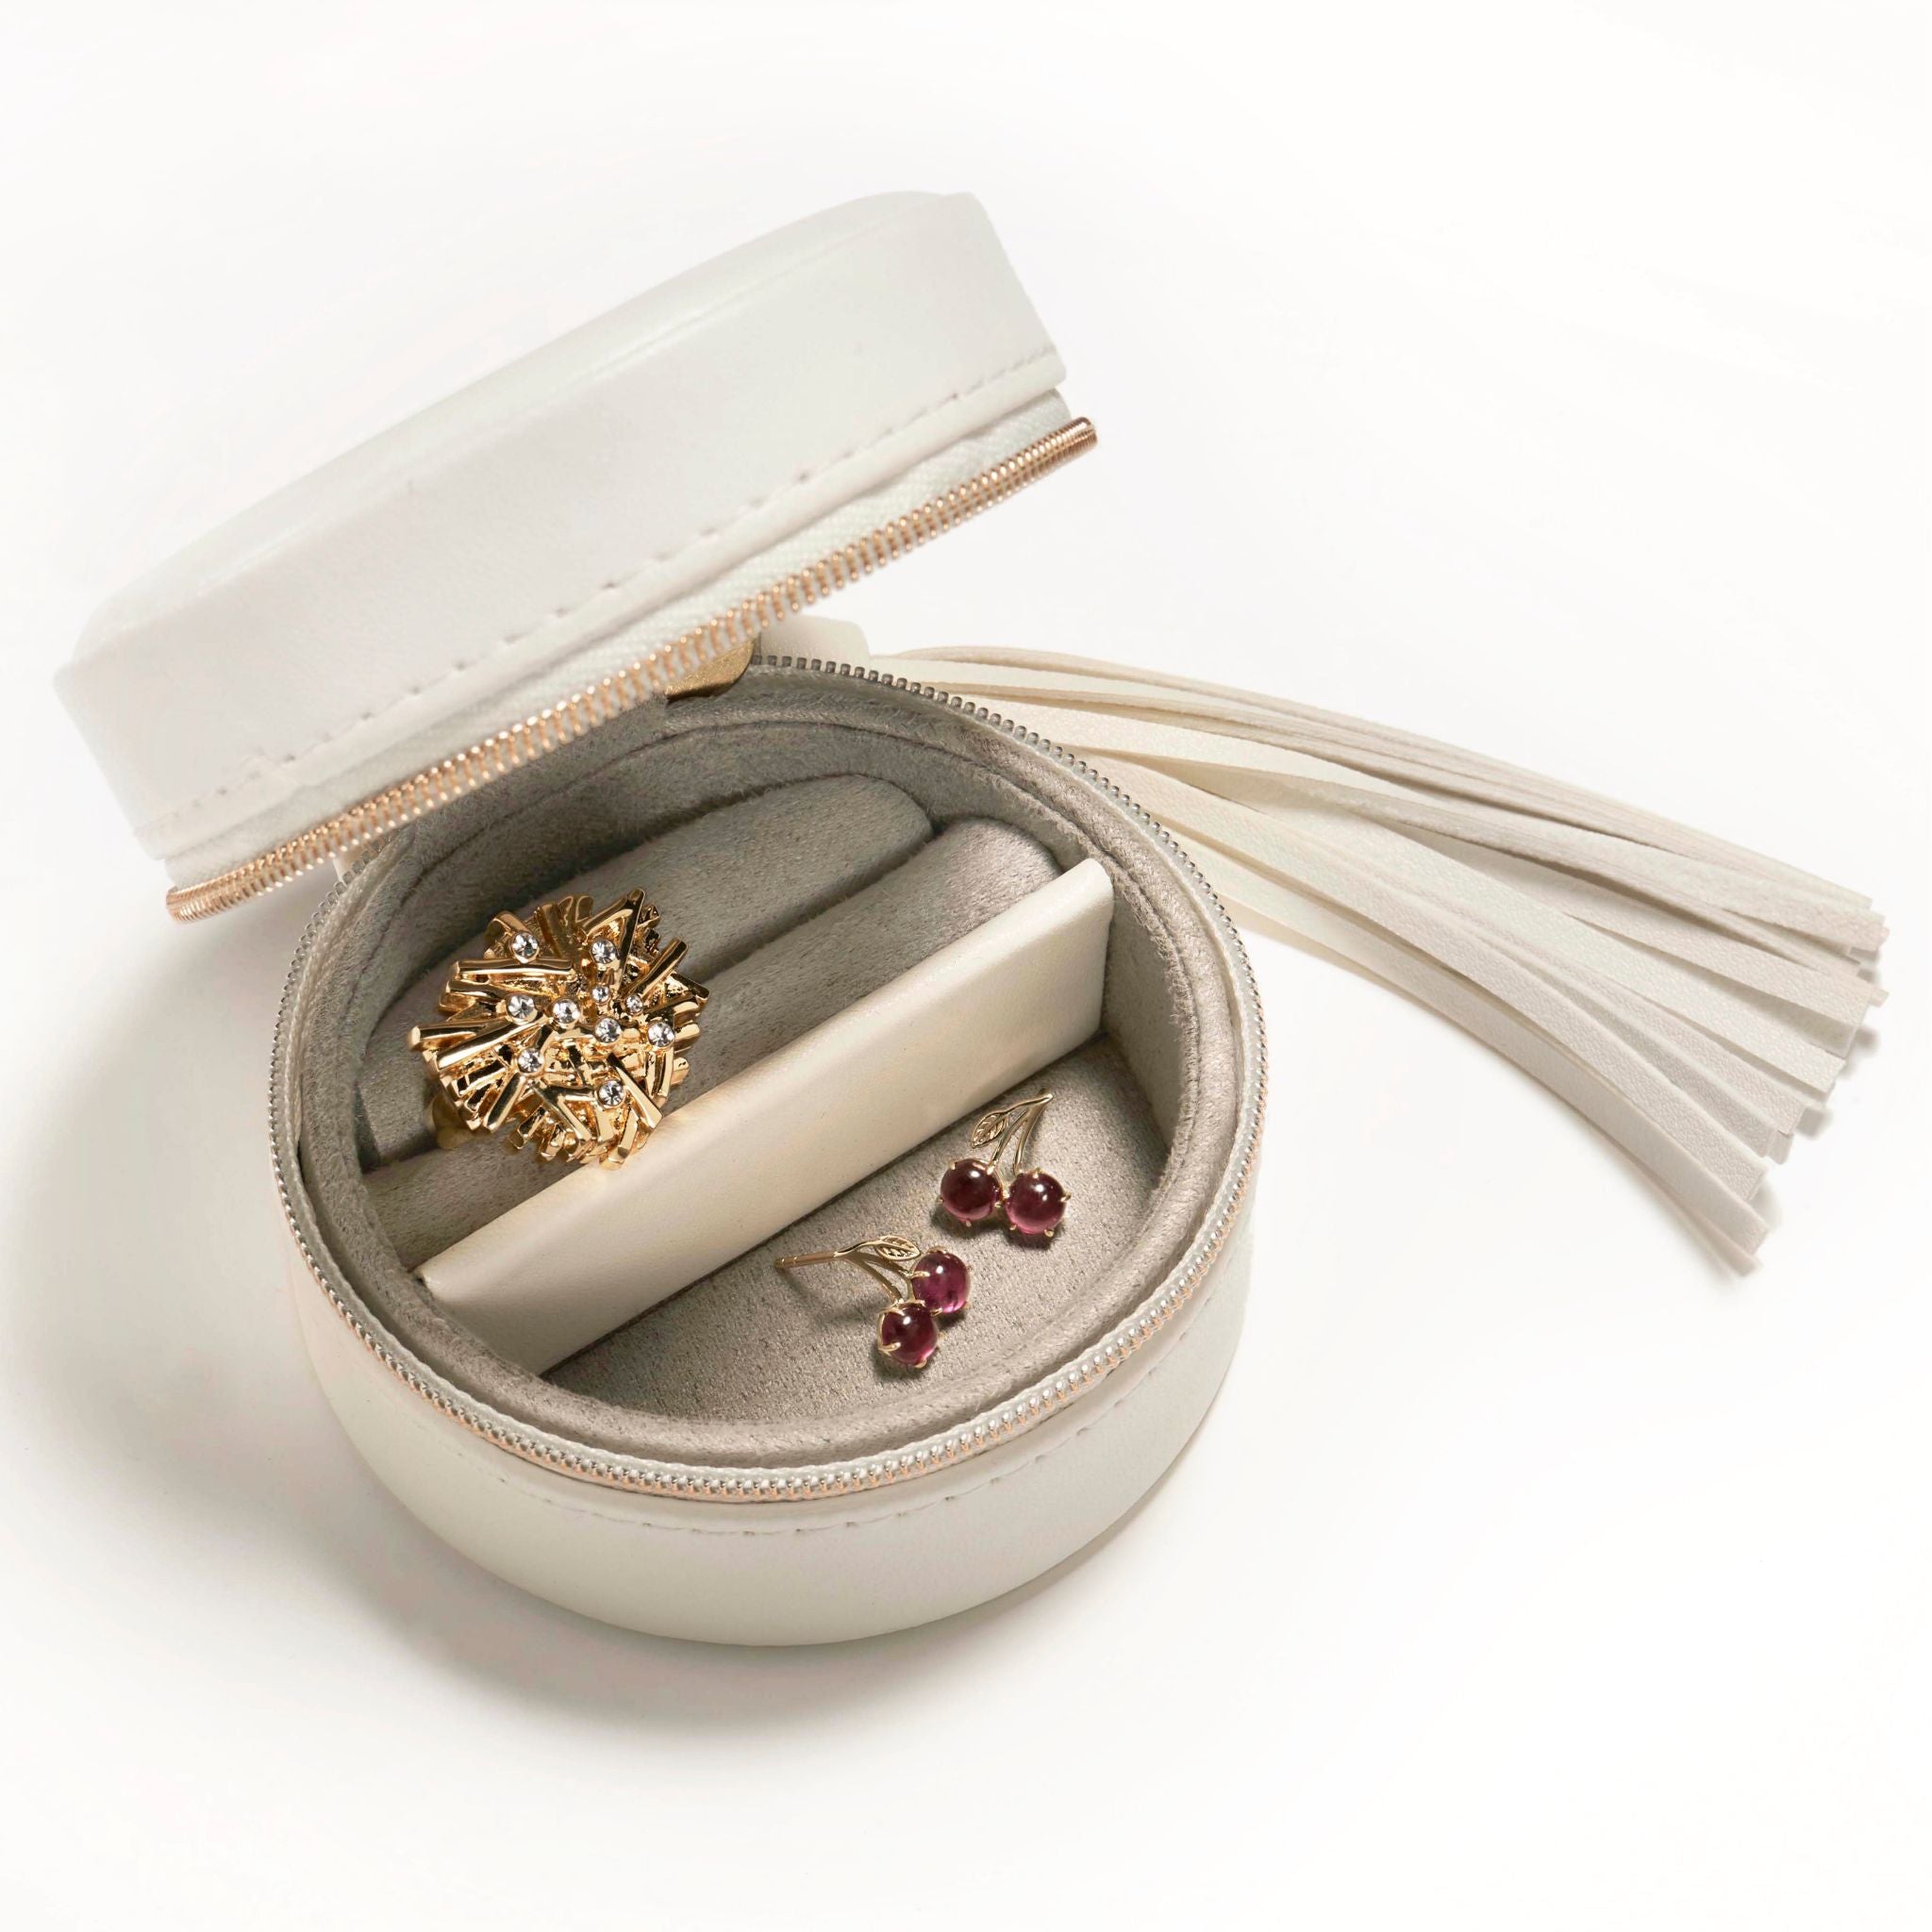 The Little Pearl Jewelry Case